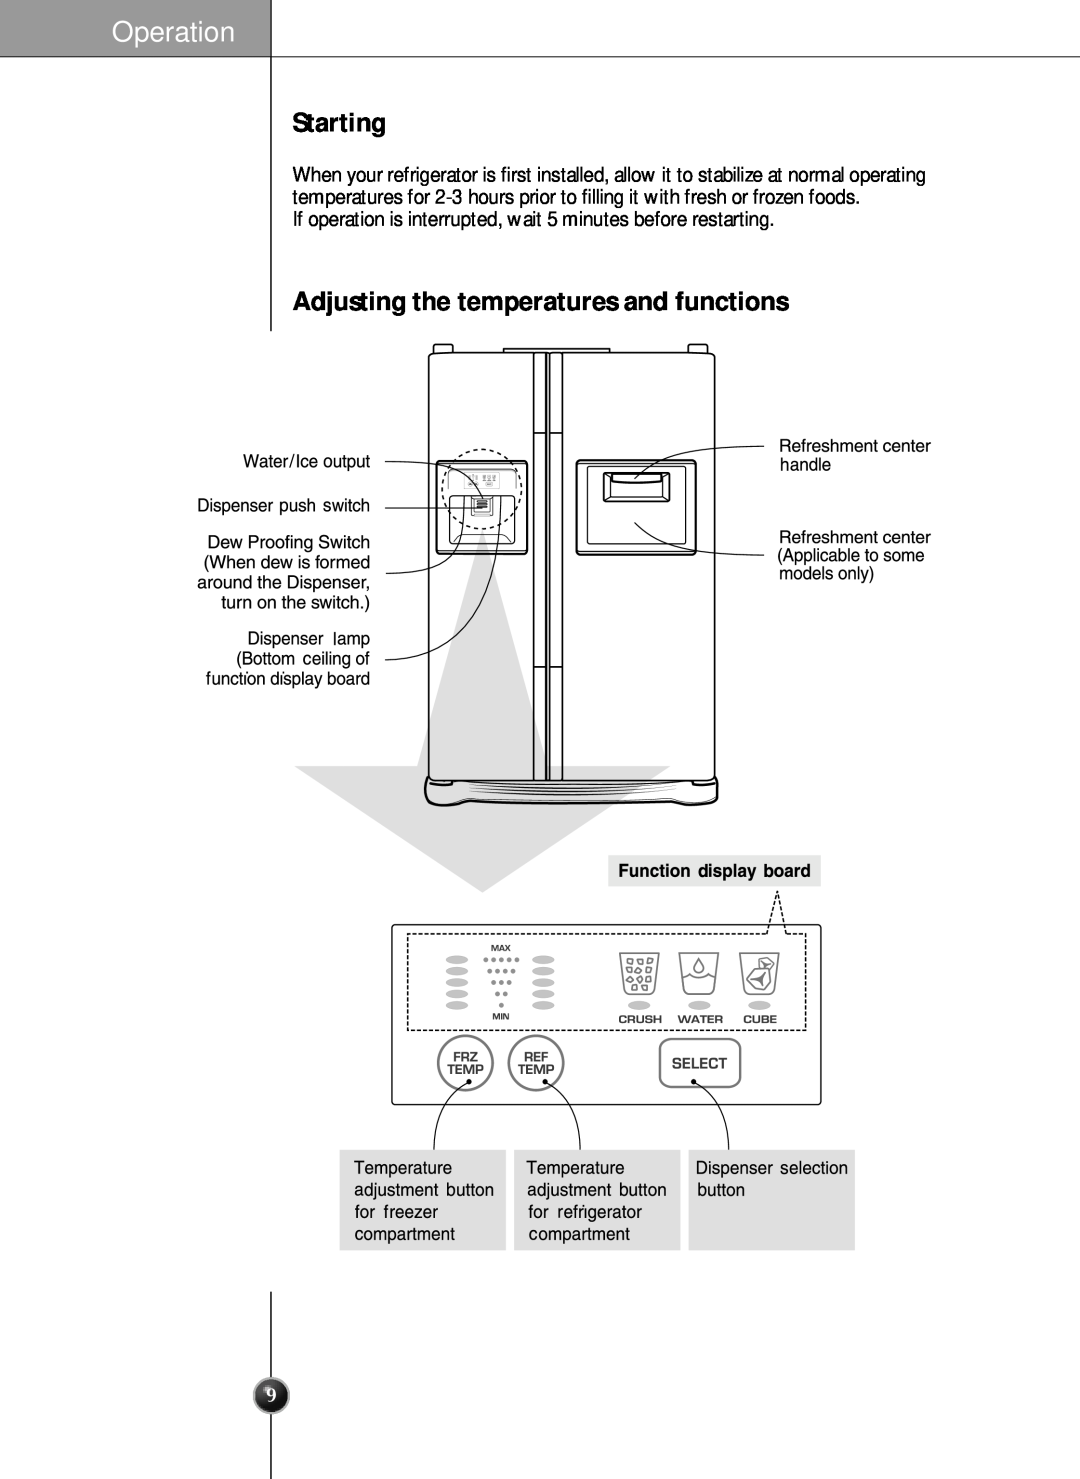 LG Electronics SXS manual Operation, Starting, Adjusting the temperatures and functions 